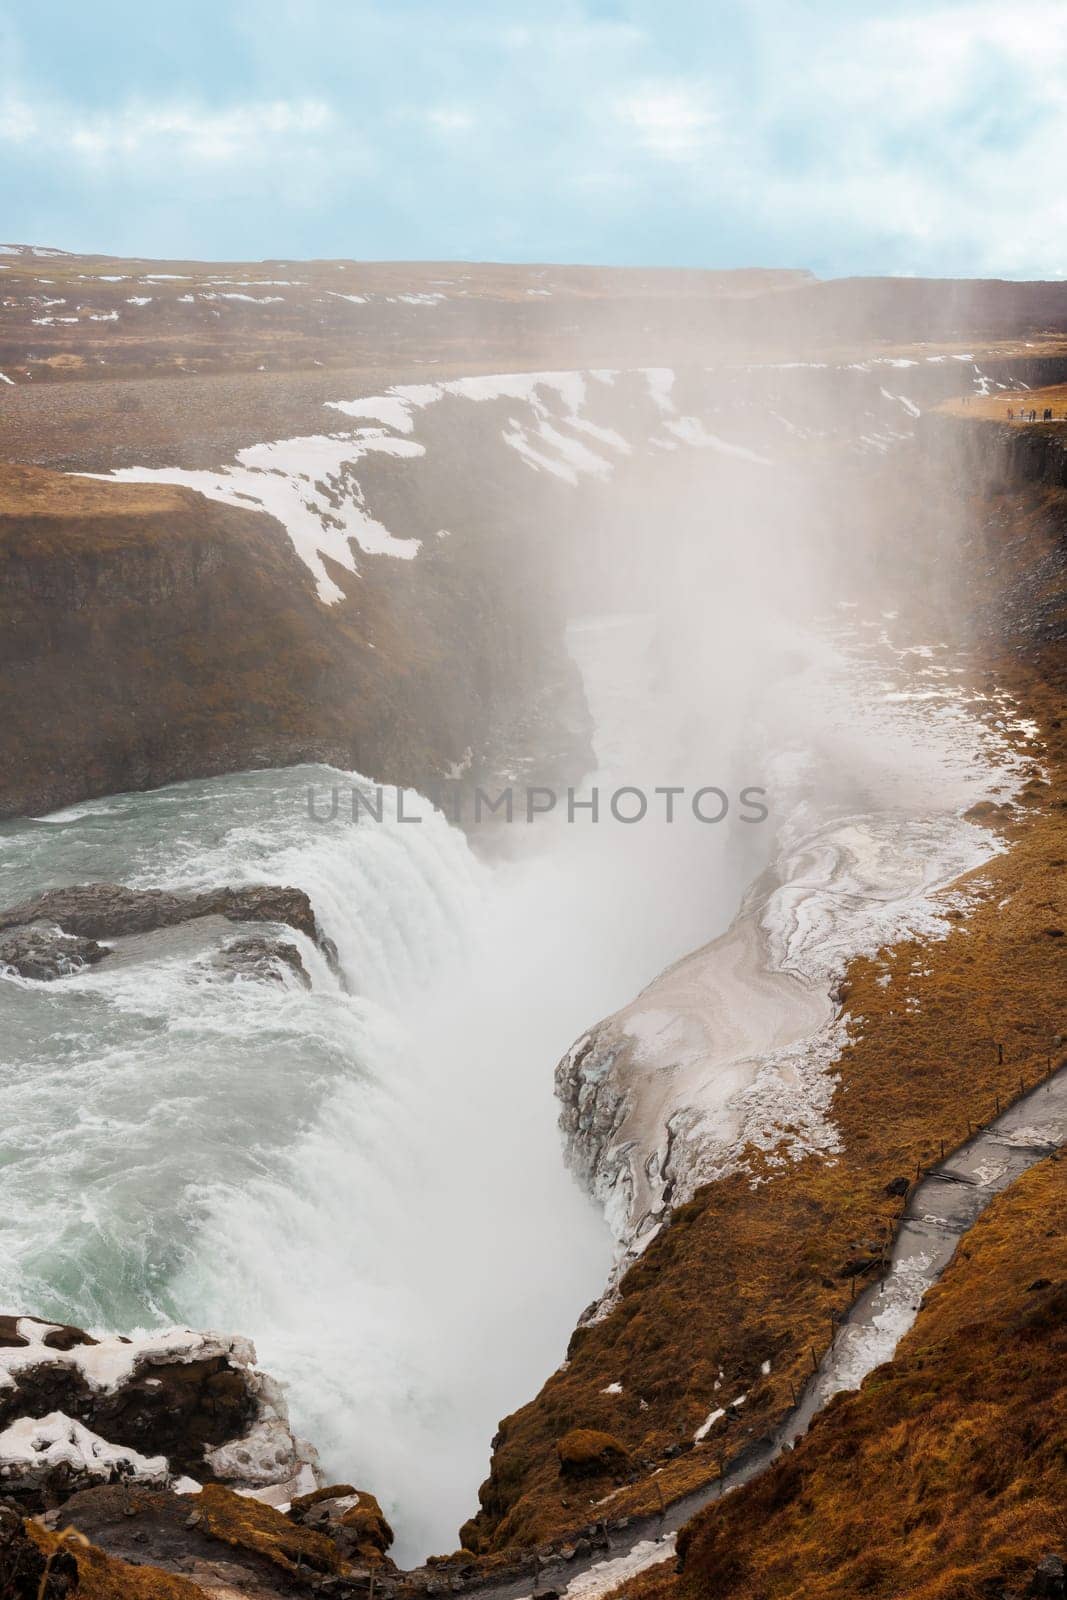 Picturesque Gullfoss waterfall in arctic wilderness offers icelandic landscape with snow covered pastures and frozen water pouring from hills. Northern beauty on hillside in Iceland.